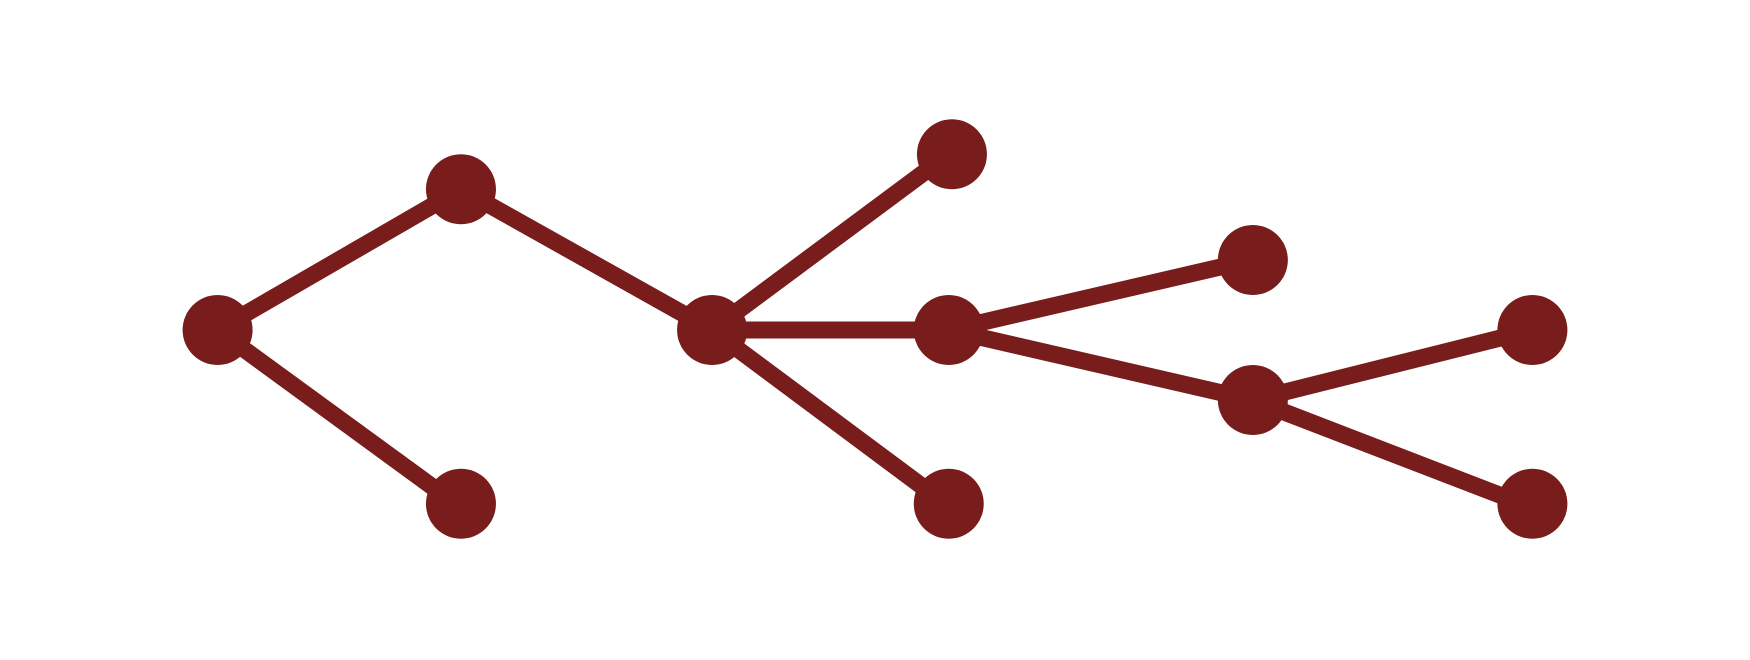 Clusters Icon (nodes)